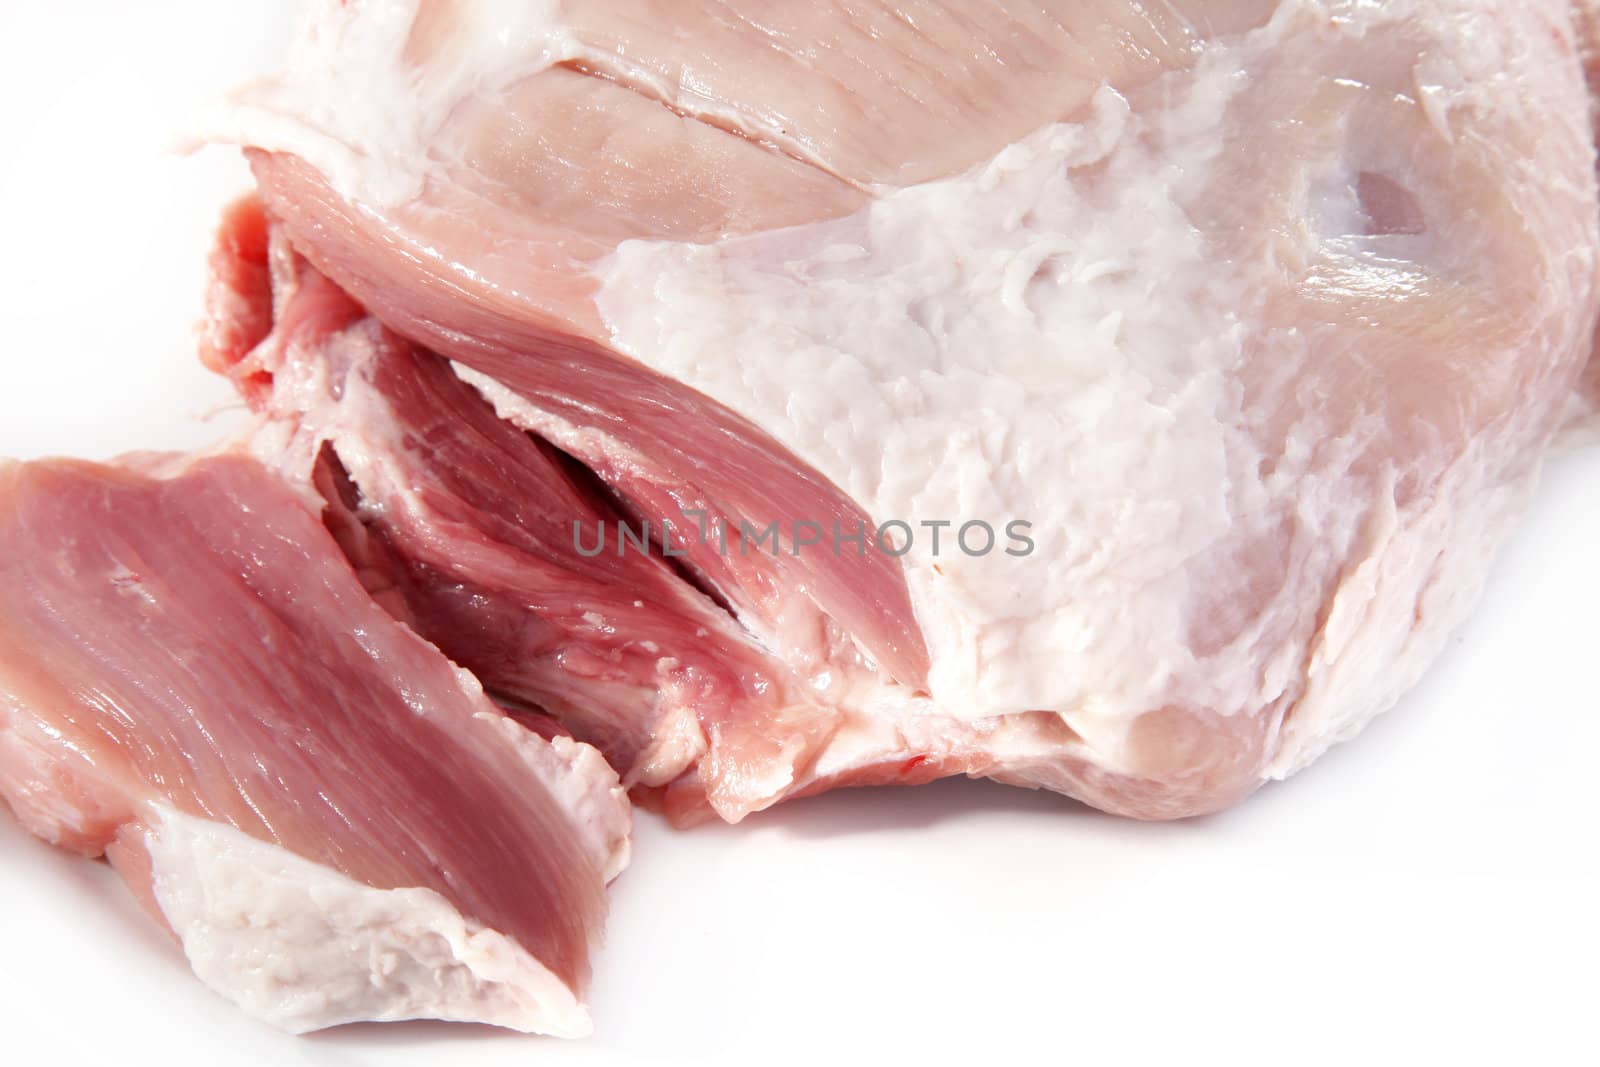 Slices of fresh raw meat cut from a beef piece, close up